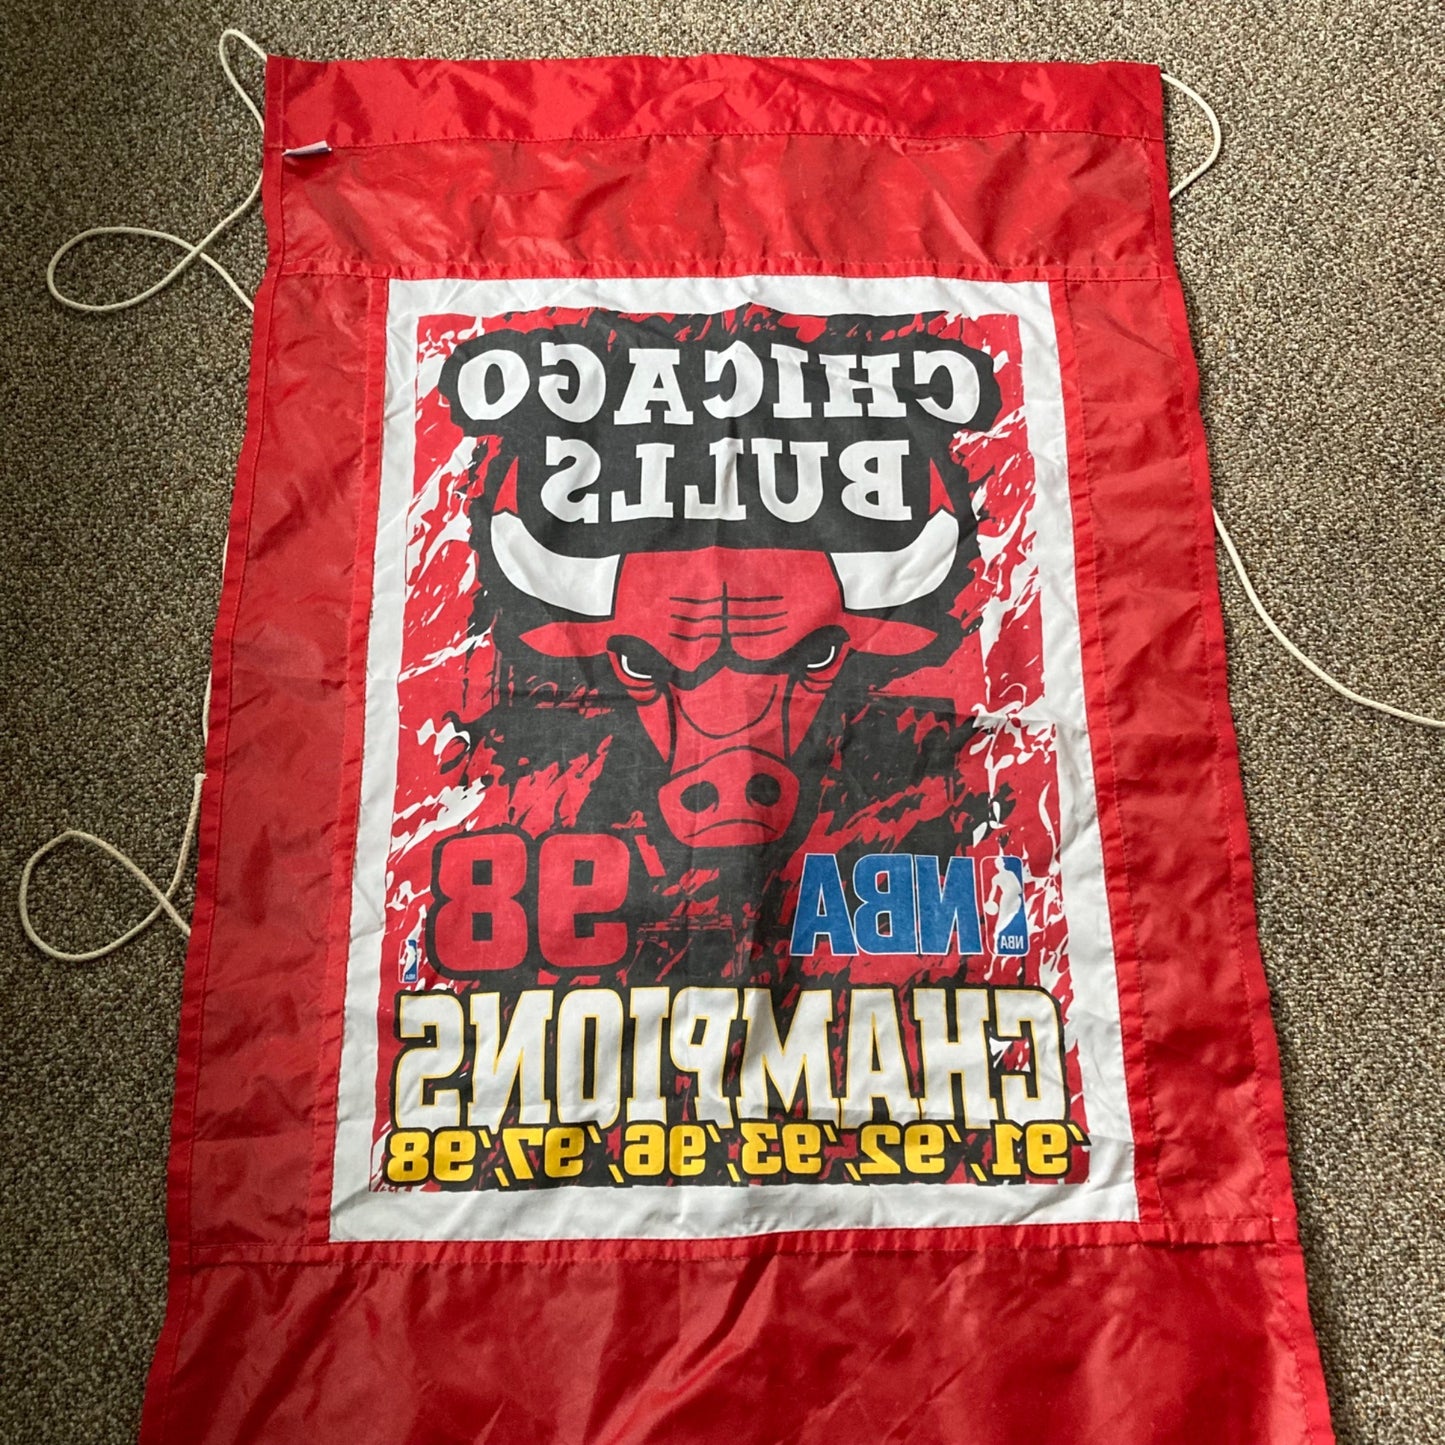 Vintage Chicago Bulls 6-Time Champions Banner Flag WinCraft 1998 91 92 93 96 97